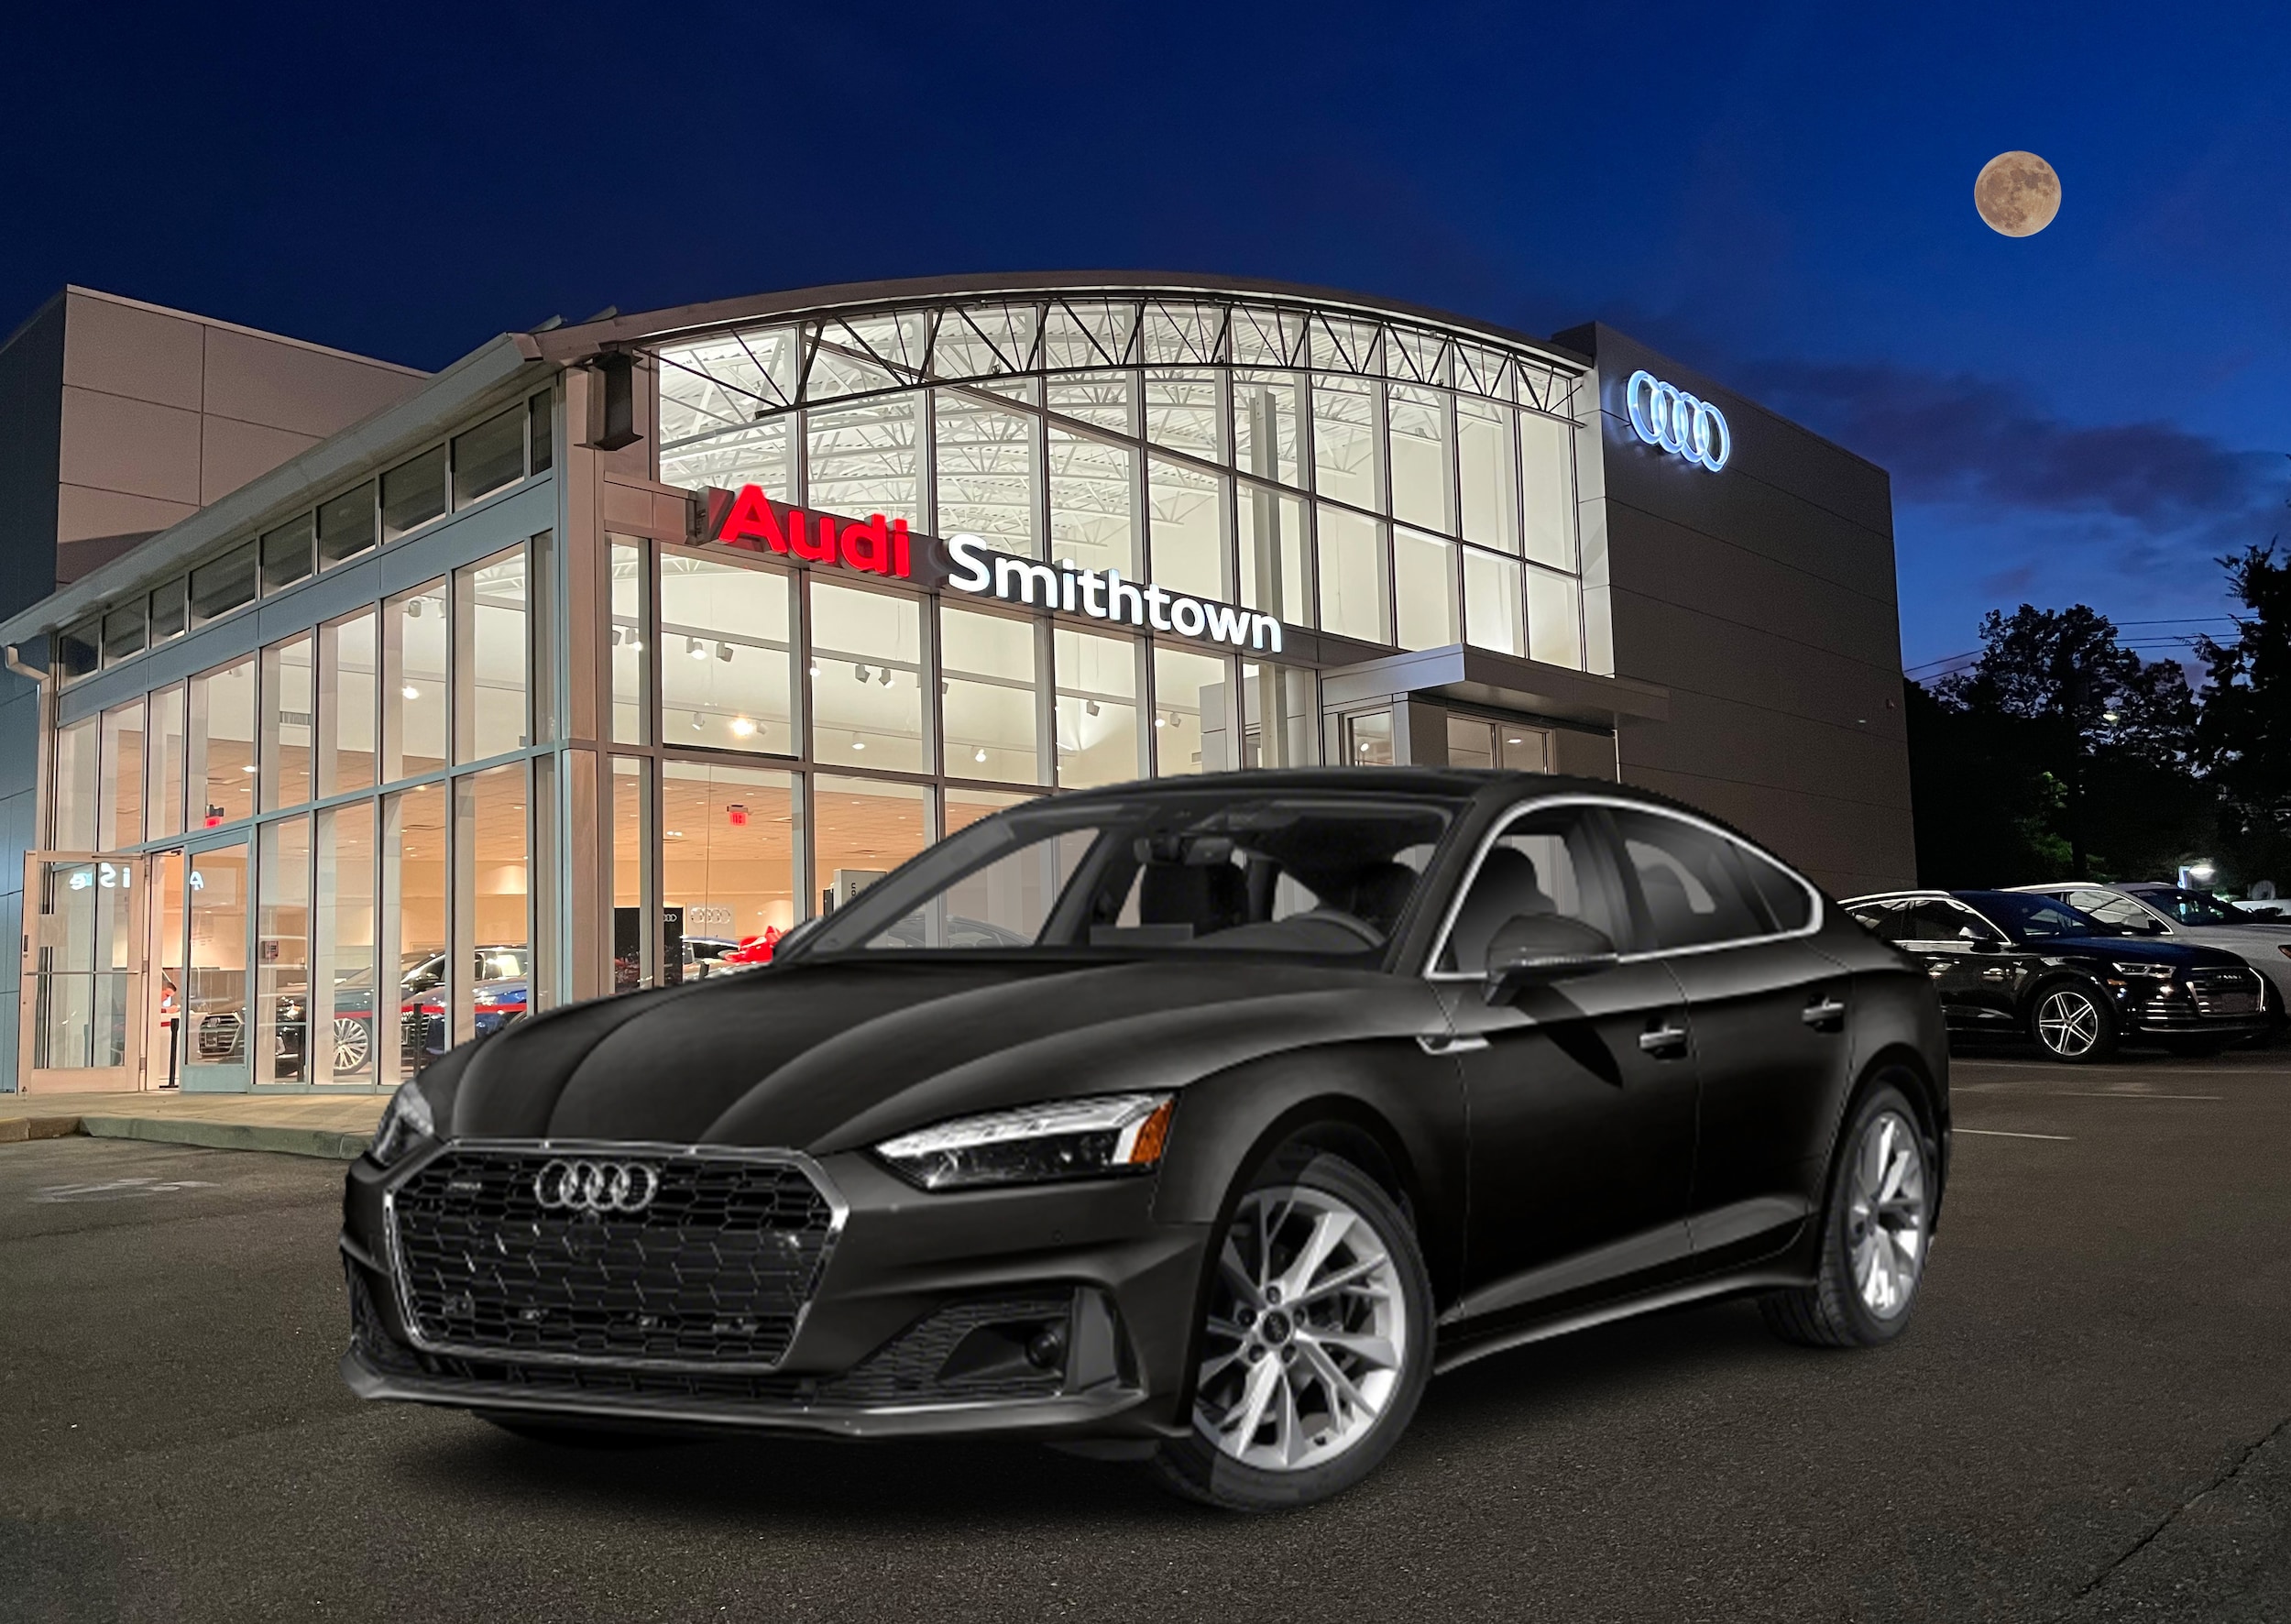 New 2024 Audi A5 45 S line Premium Plus For Sale in St. James, NY near  Smithtown, NY, Serving Brentwood, Hauppage, Centereach & Stony Brook, NY